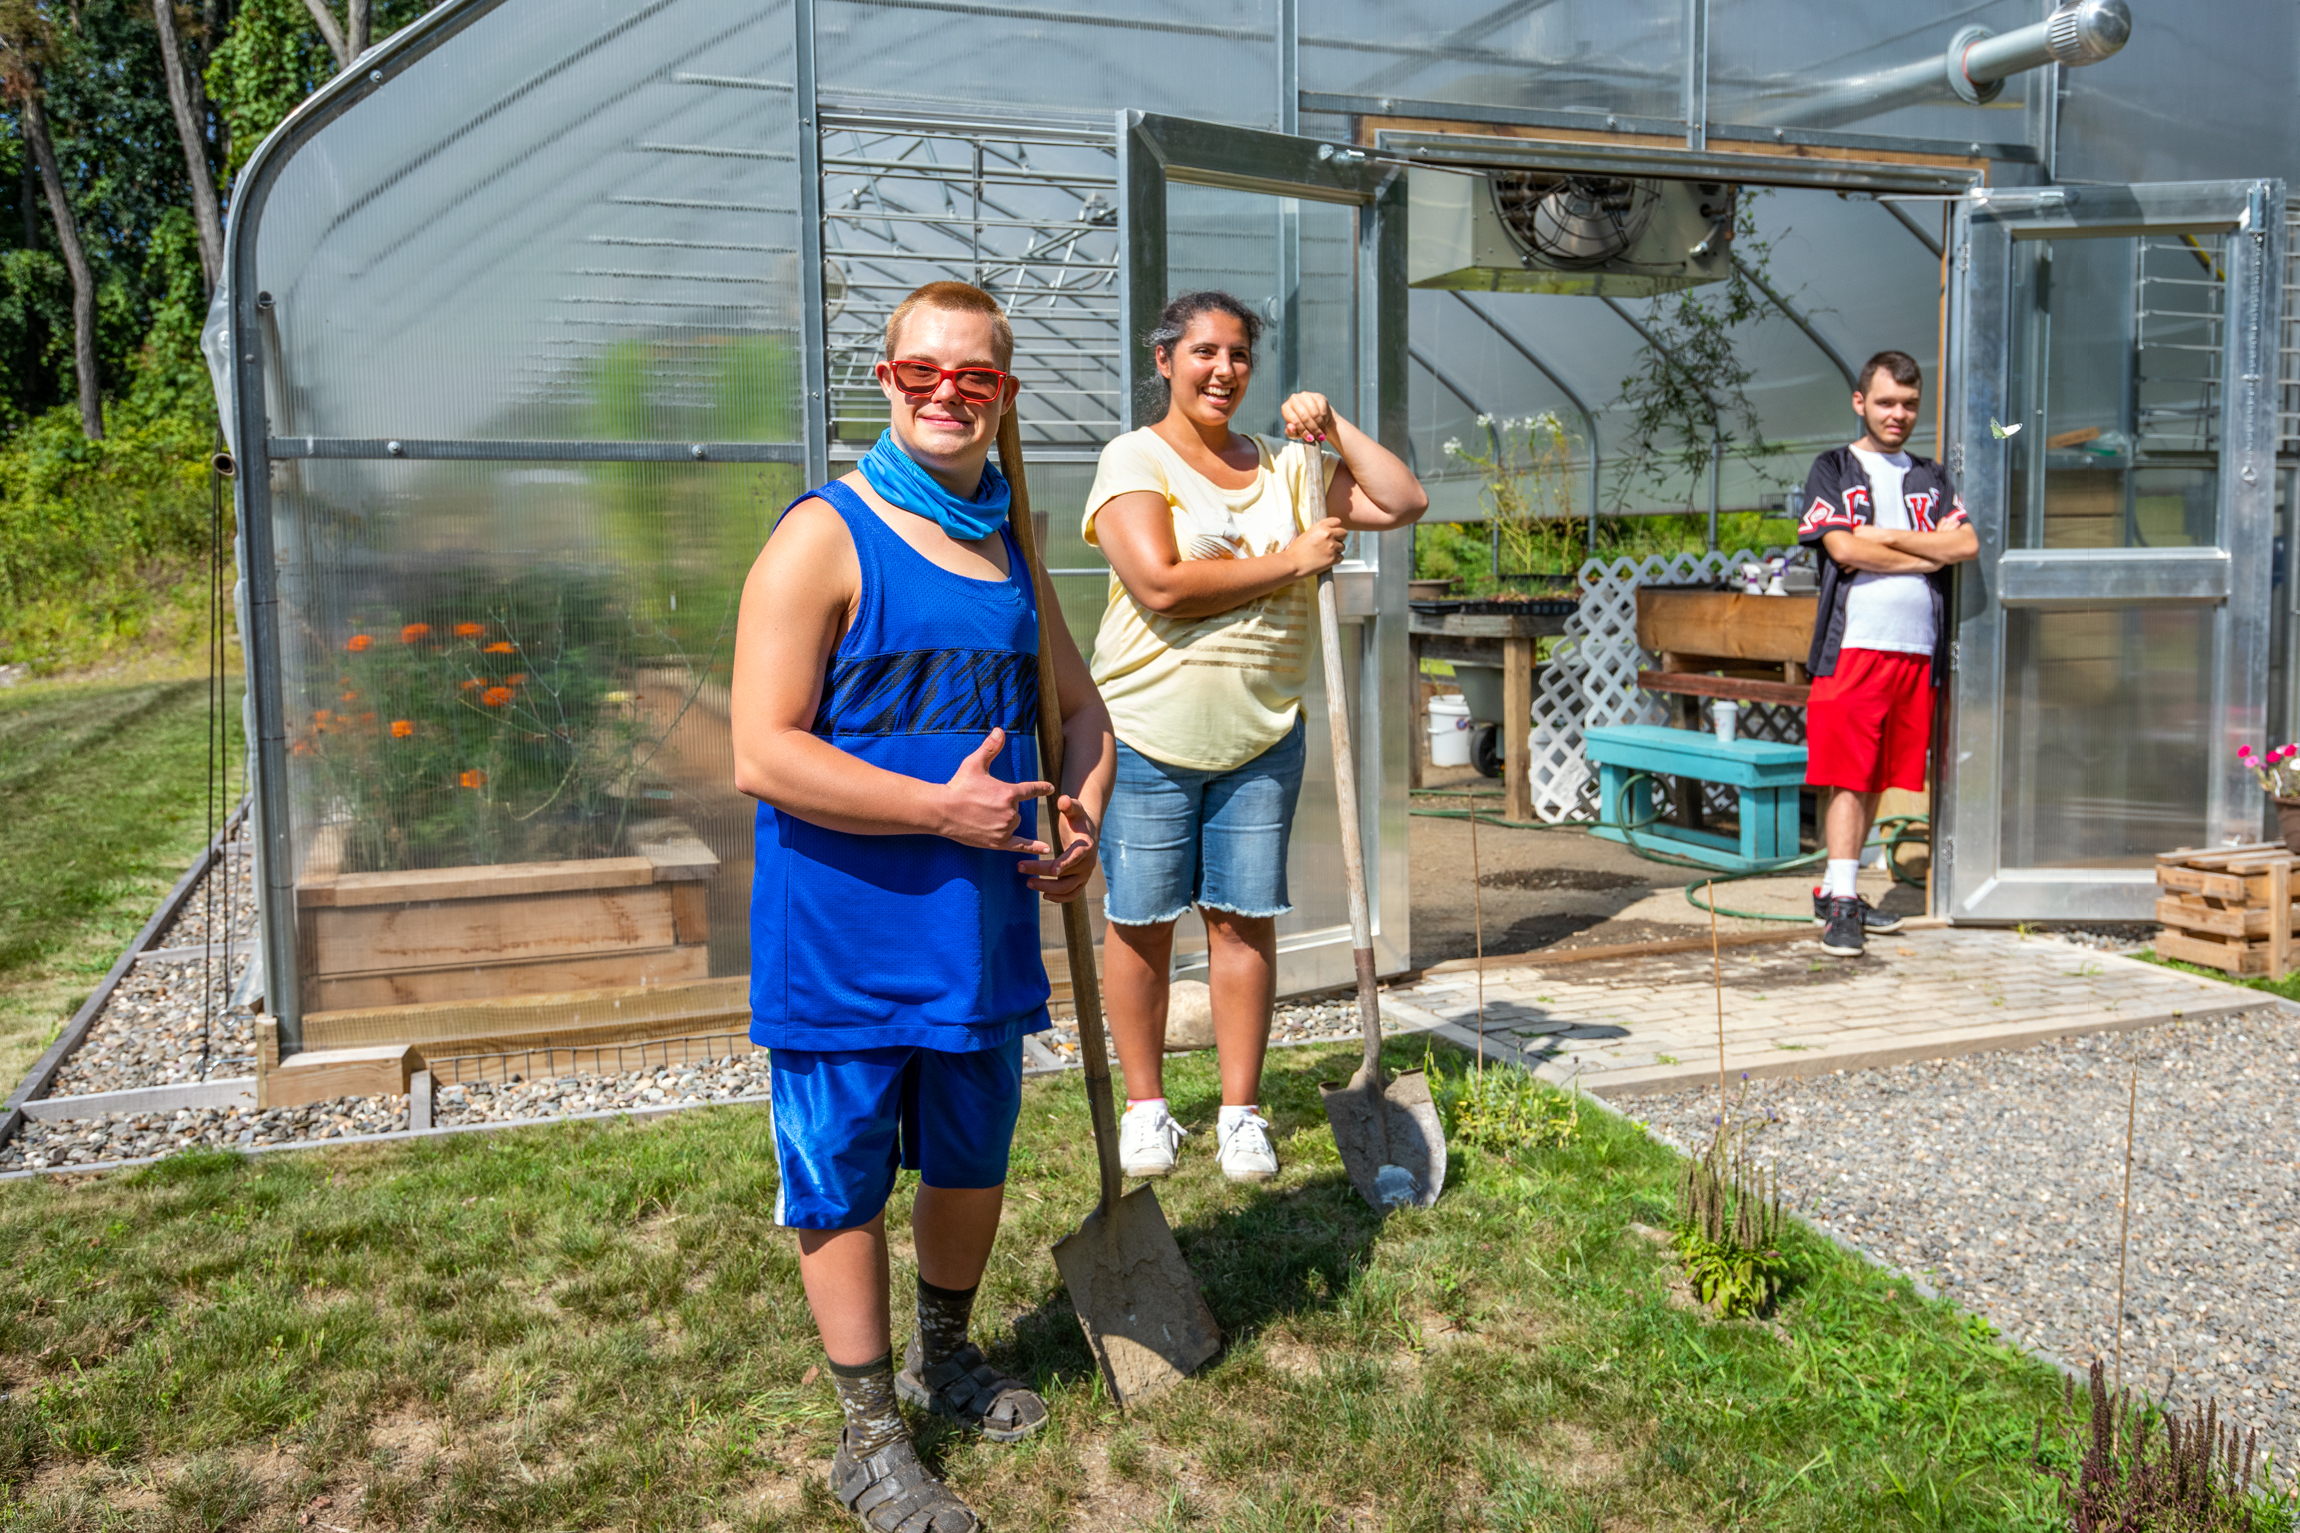 Working with shovels near the greenhouse is part of the agricultural vocational curriculum.